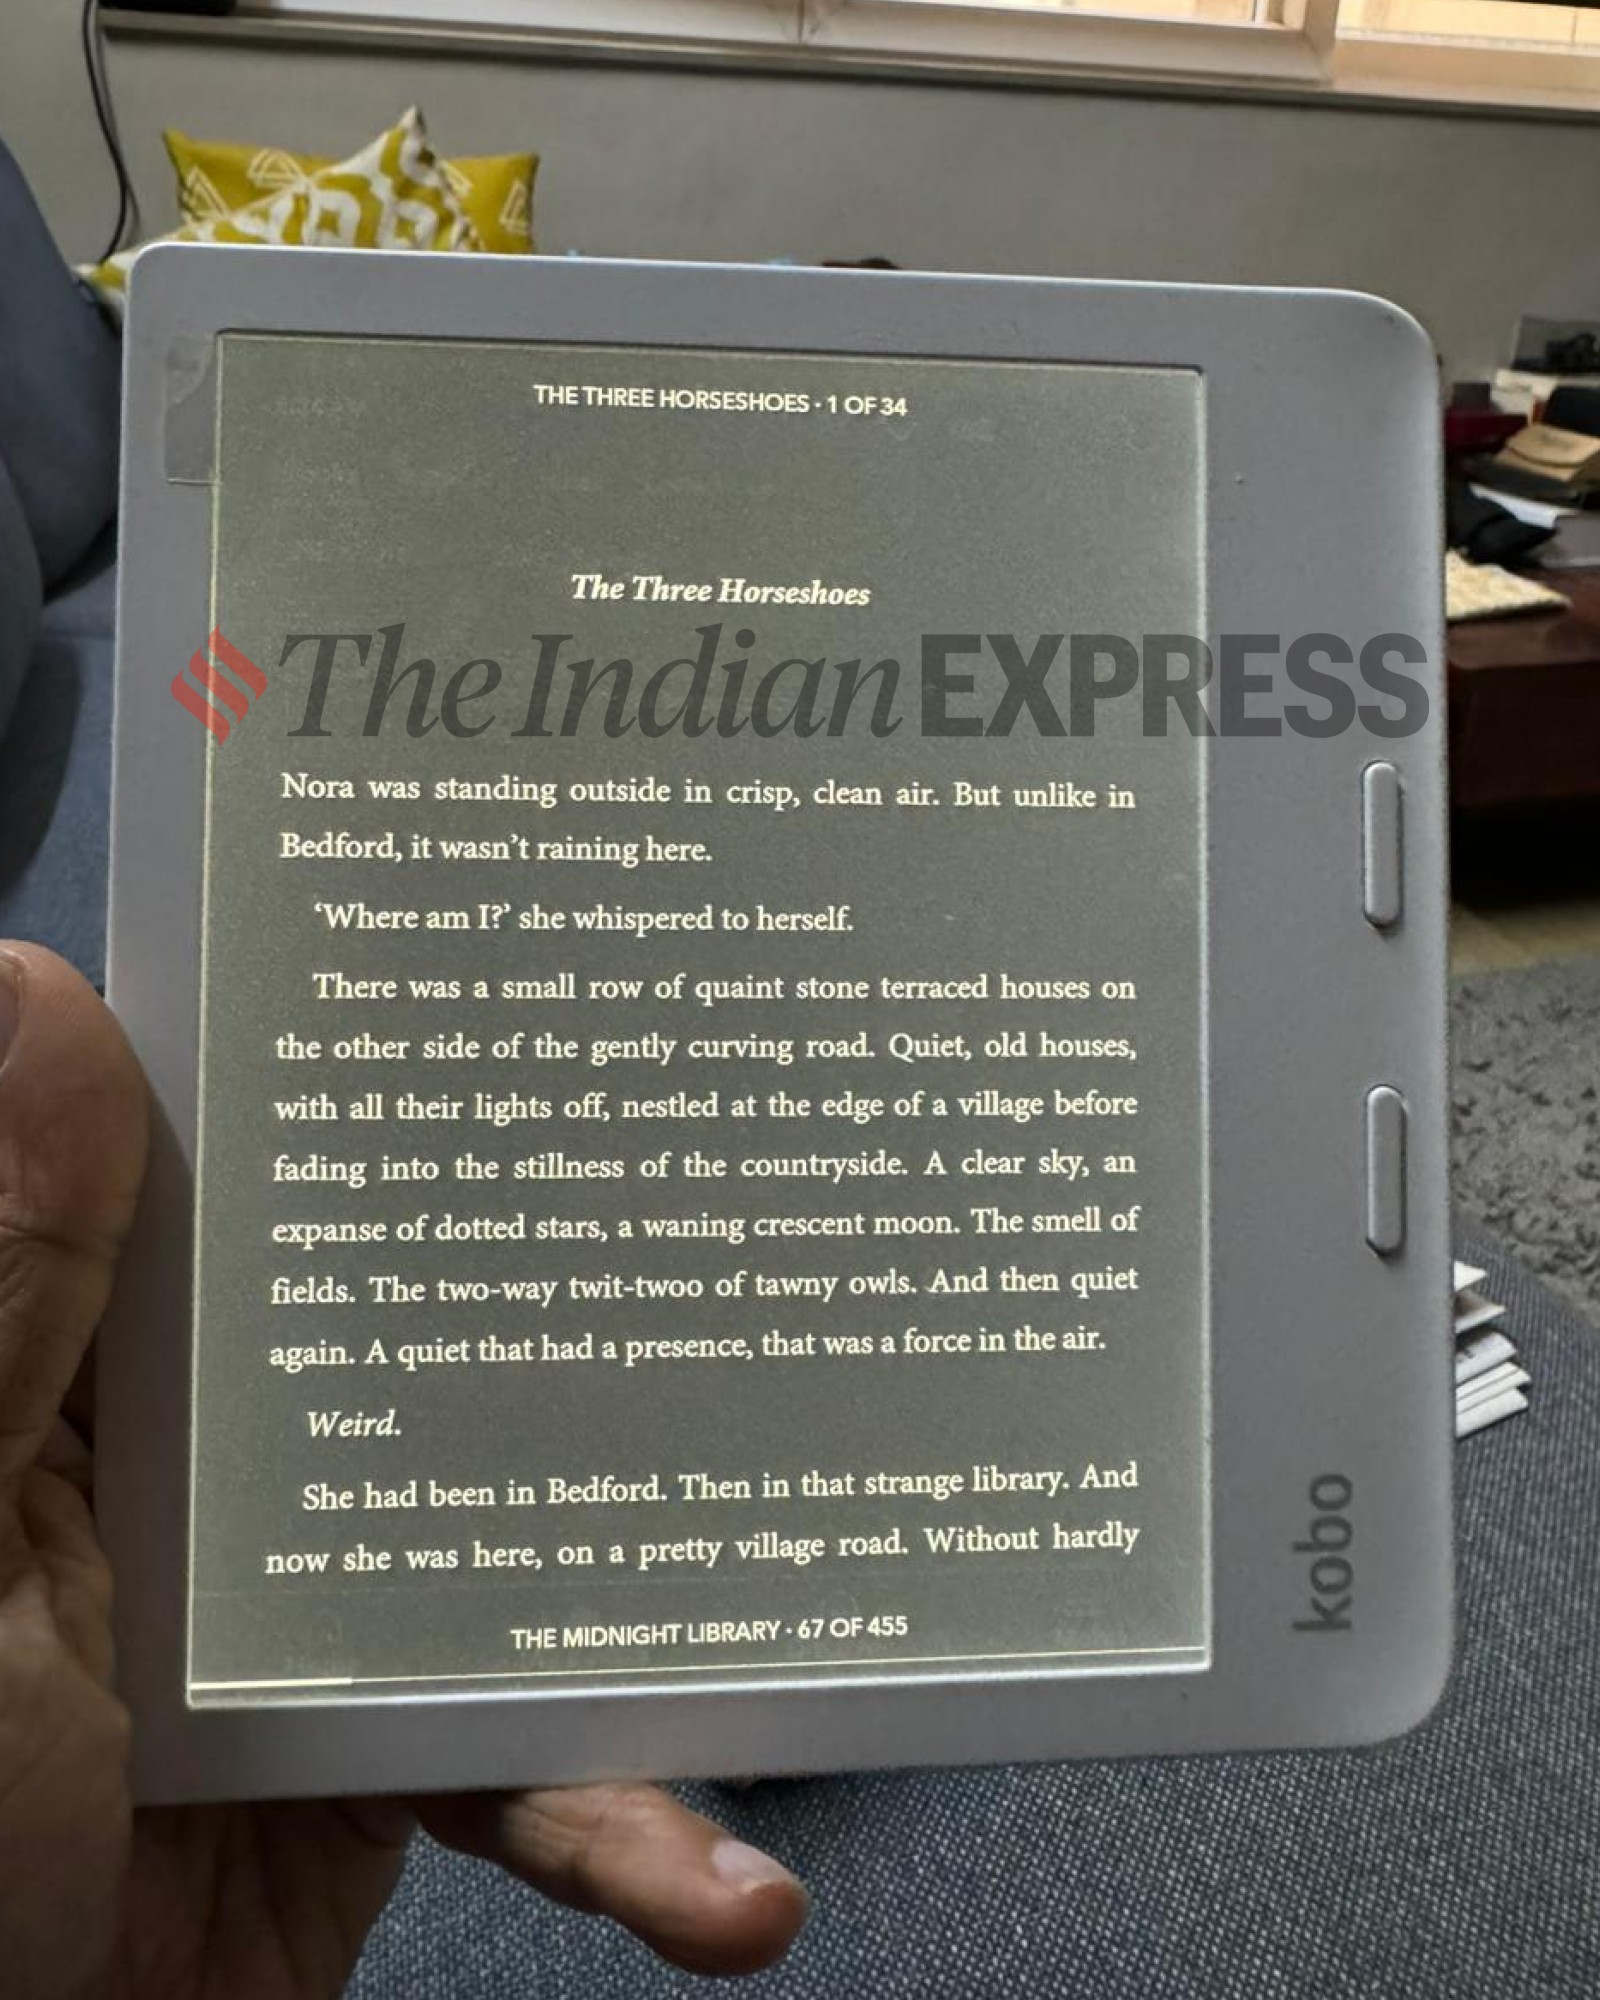 Kobo Libra 2 Review - What I like about it 